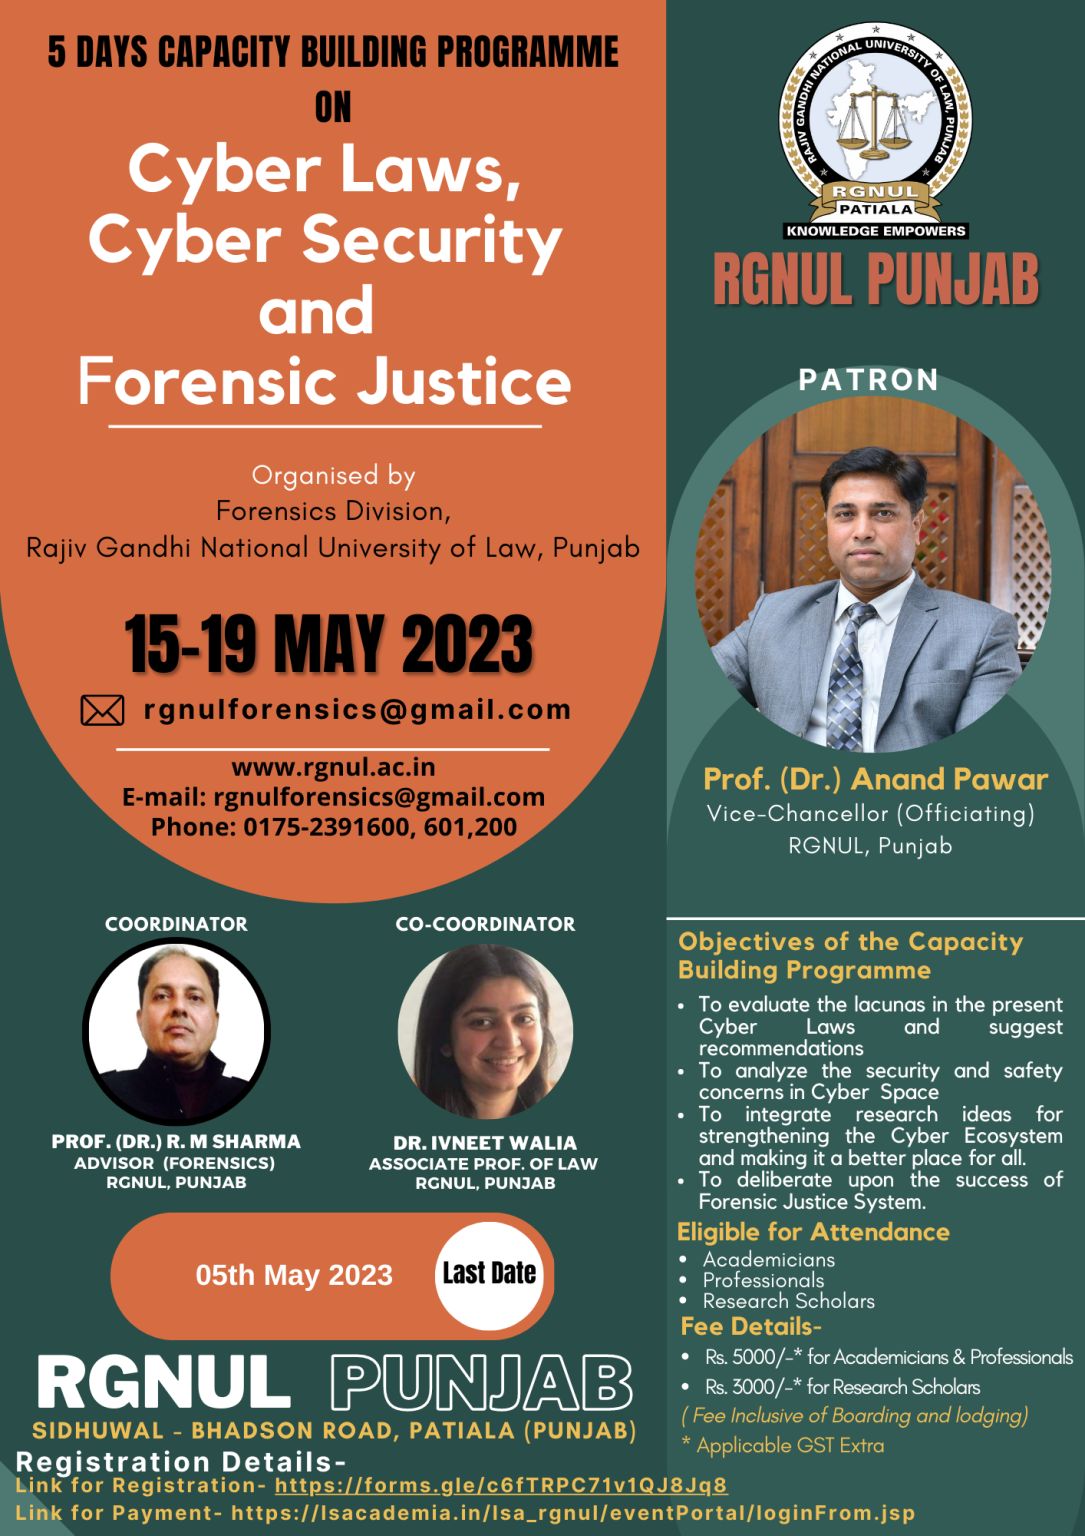 RGNUL PUNJAB : 5 days capacity building Programme on Cyber laws, cyber security and forensic Justice